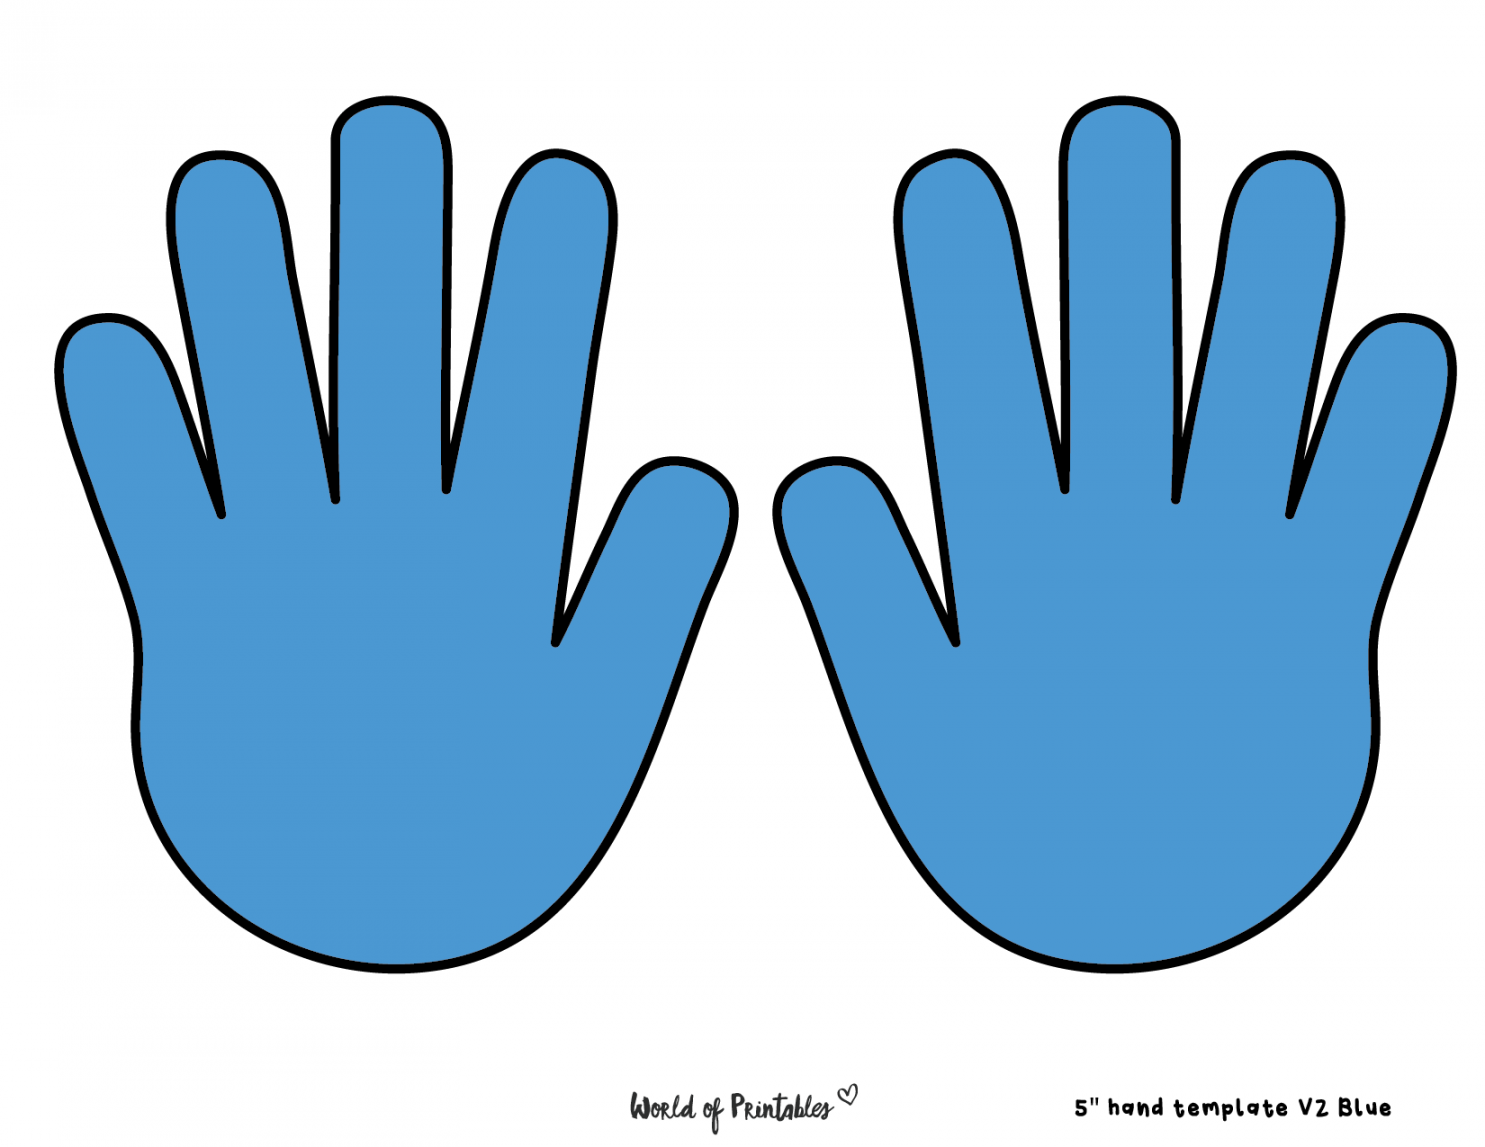 Hand Outline Printable Templates - World of Printables - FREE Printables - Cut Out Hands